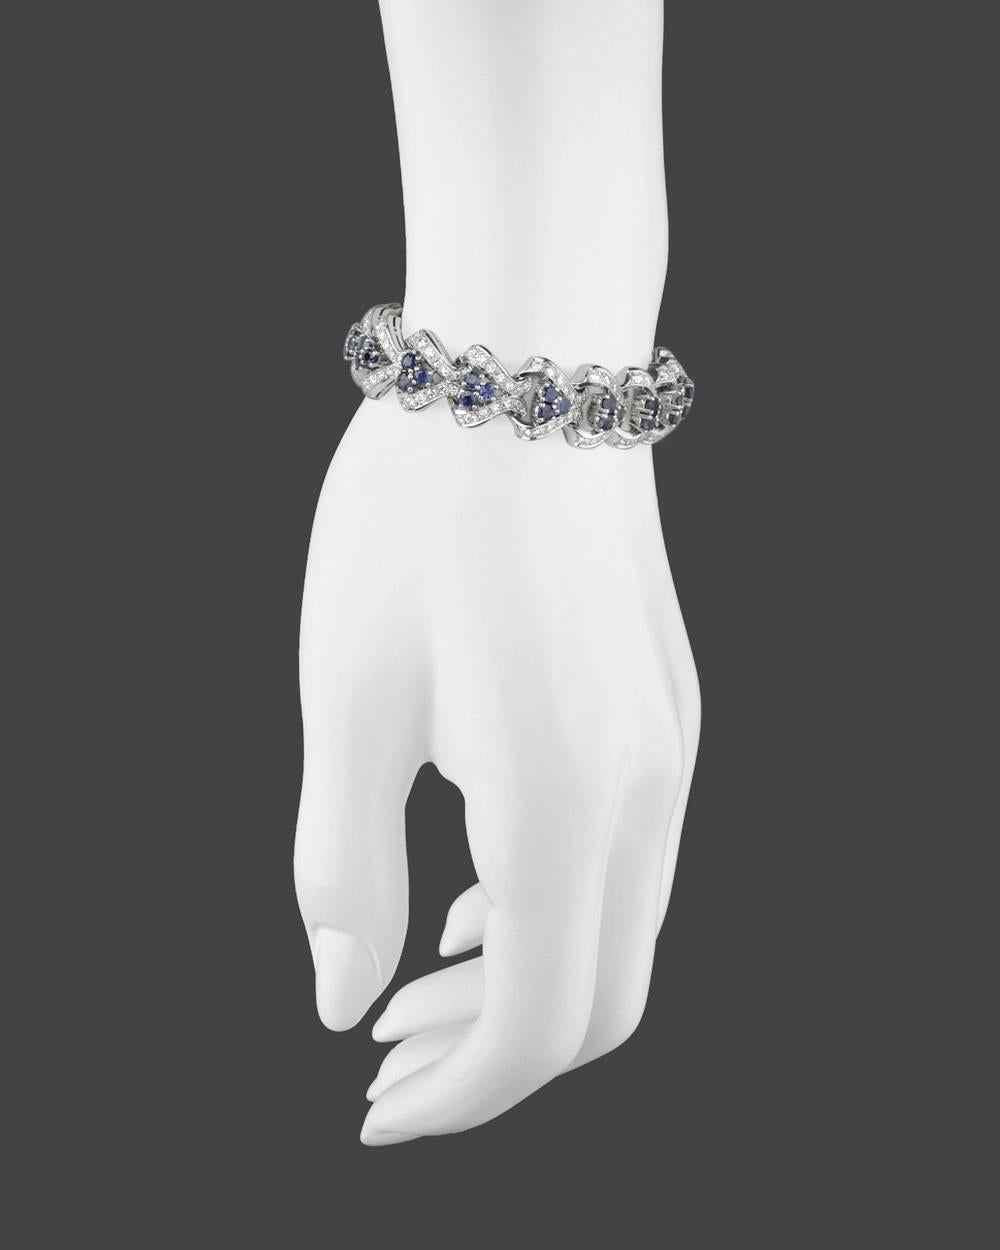 Sapphire and diamond scroll bracelet, each arrow-shaped link set with a trefoil cluster of round sapphires flanked by a row of round diamonds on either side, in 18k white gold. 51 sapphires weighing approximately 6.12 total carats and 170 diamonds